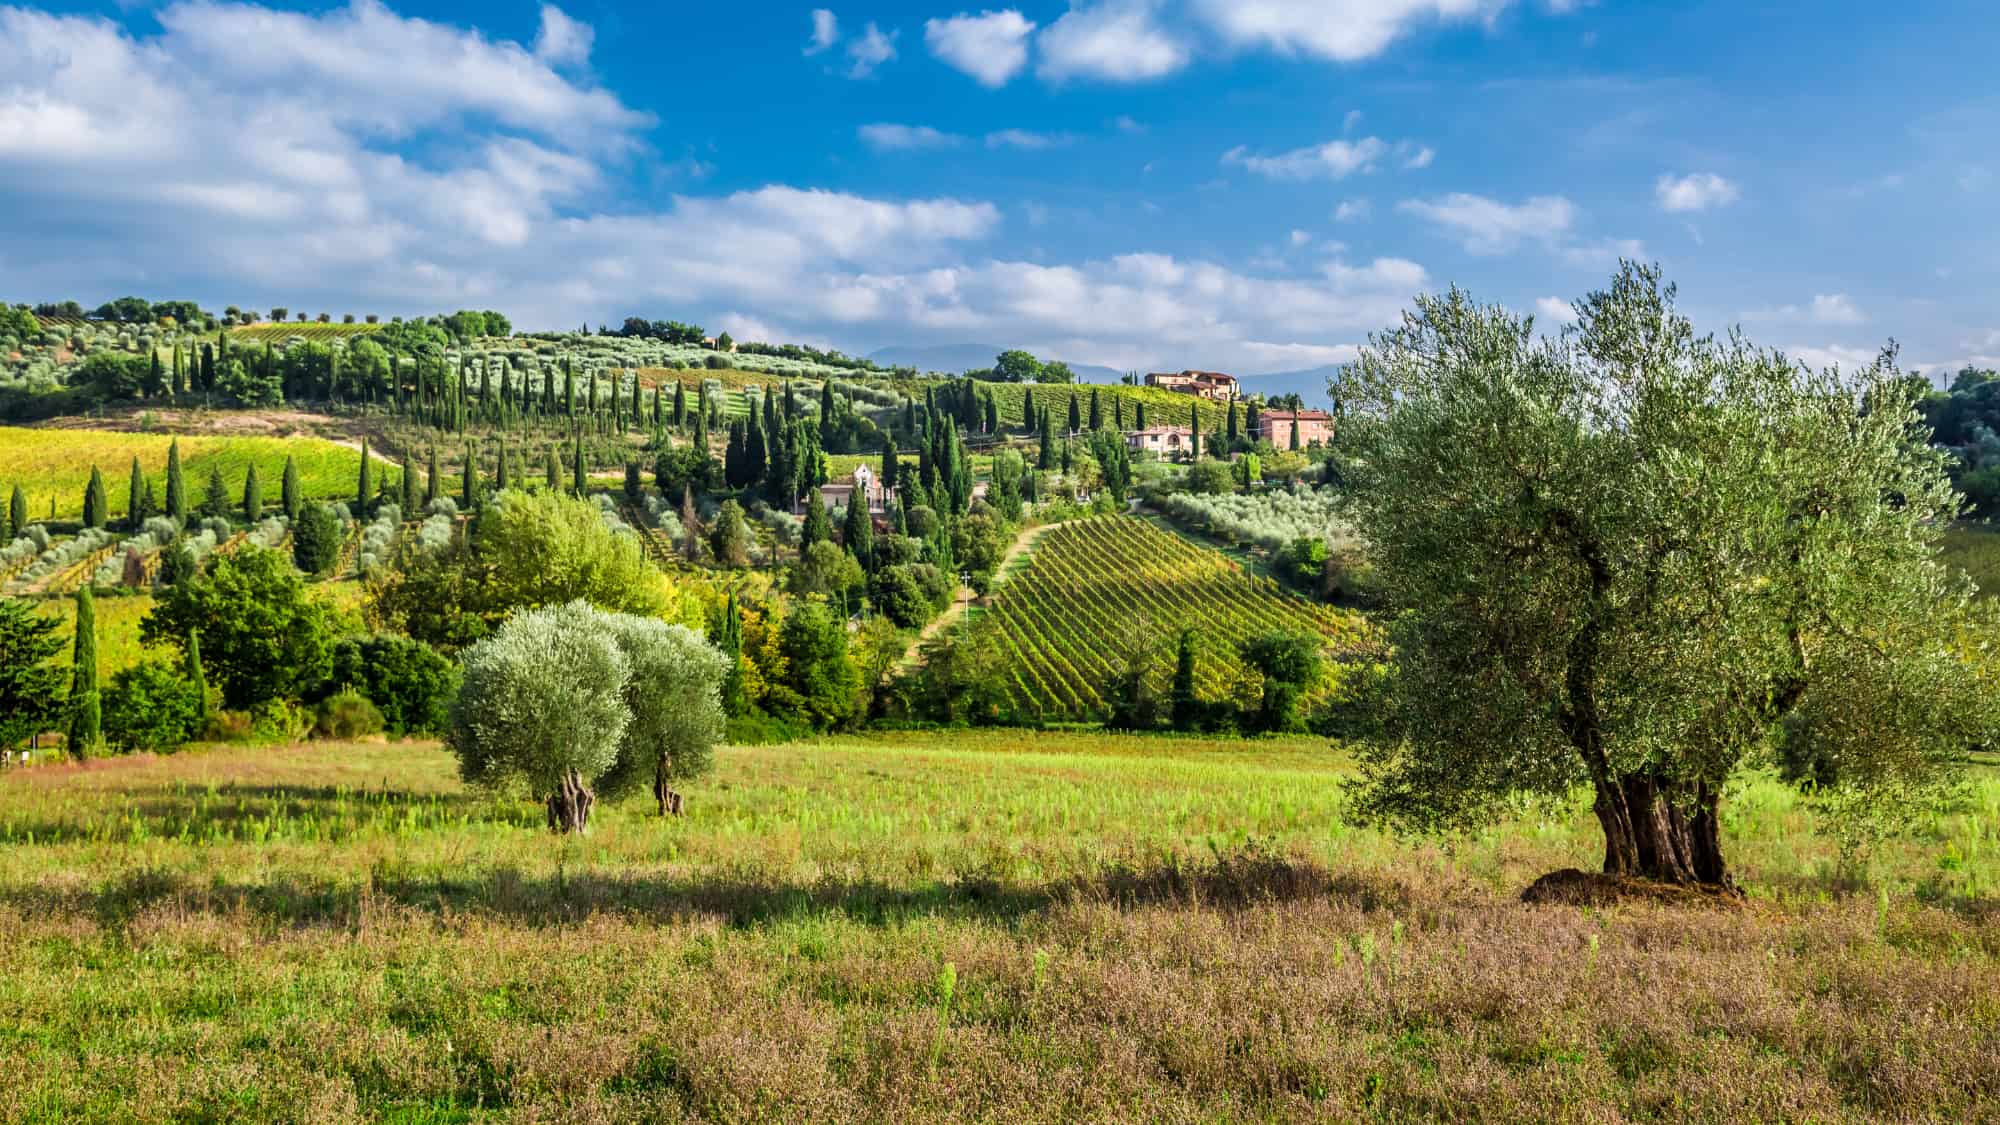 Olive trees and vineyards in Tuscany